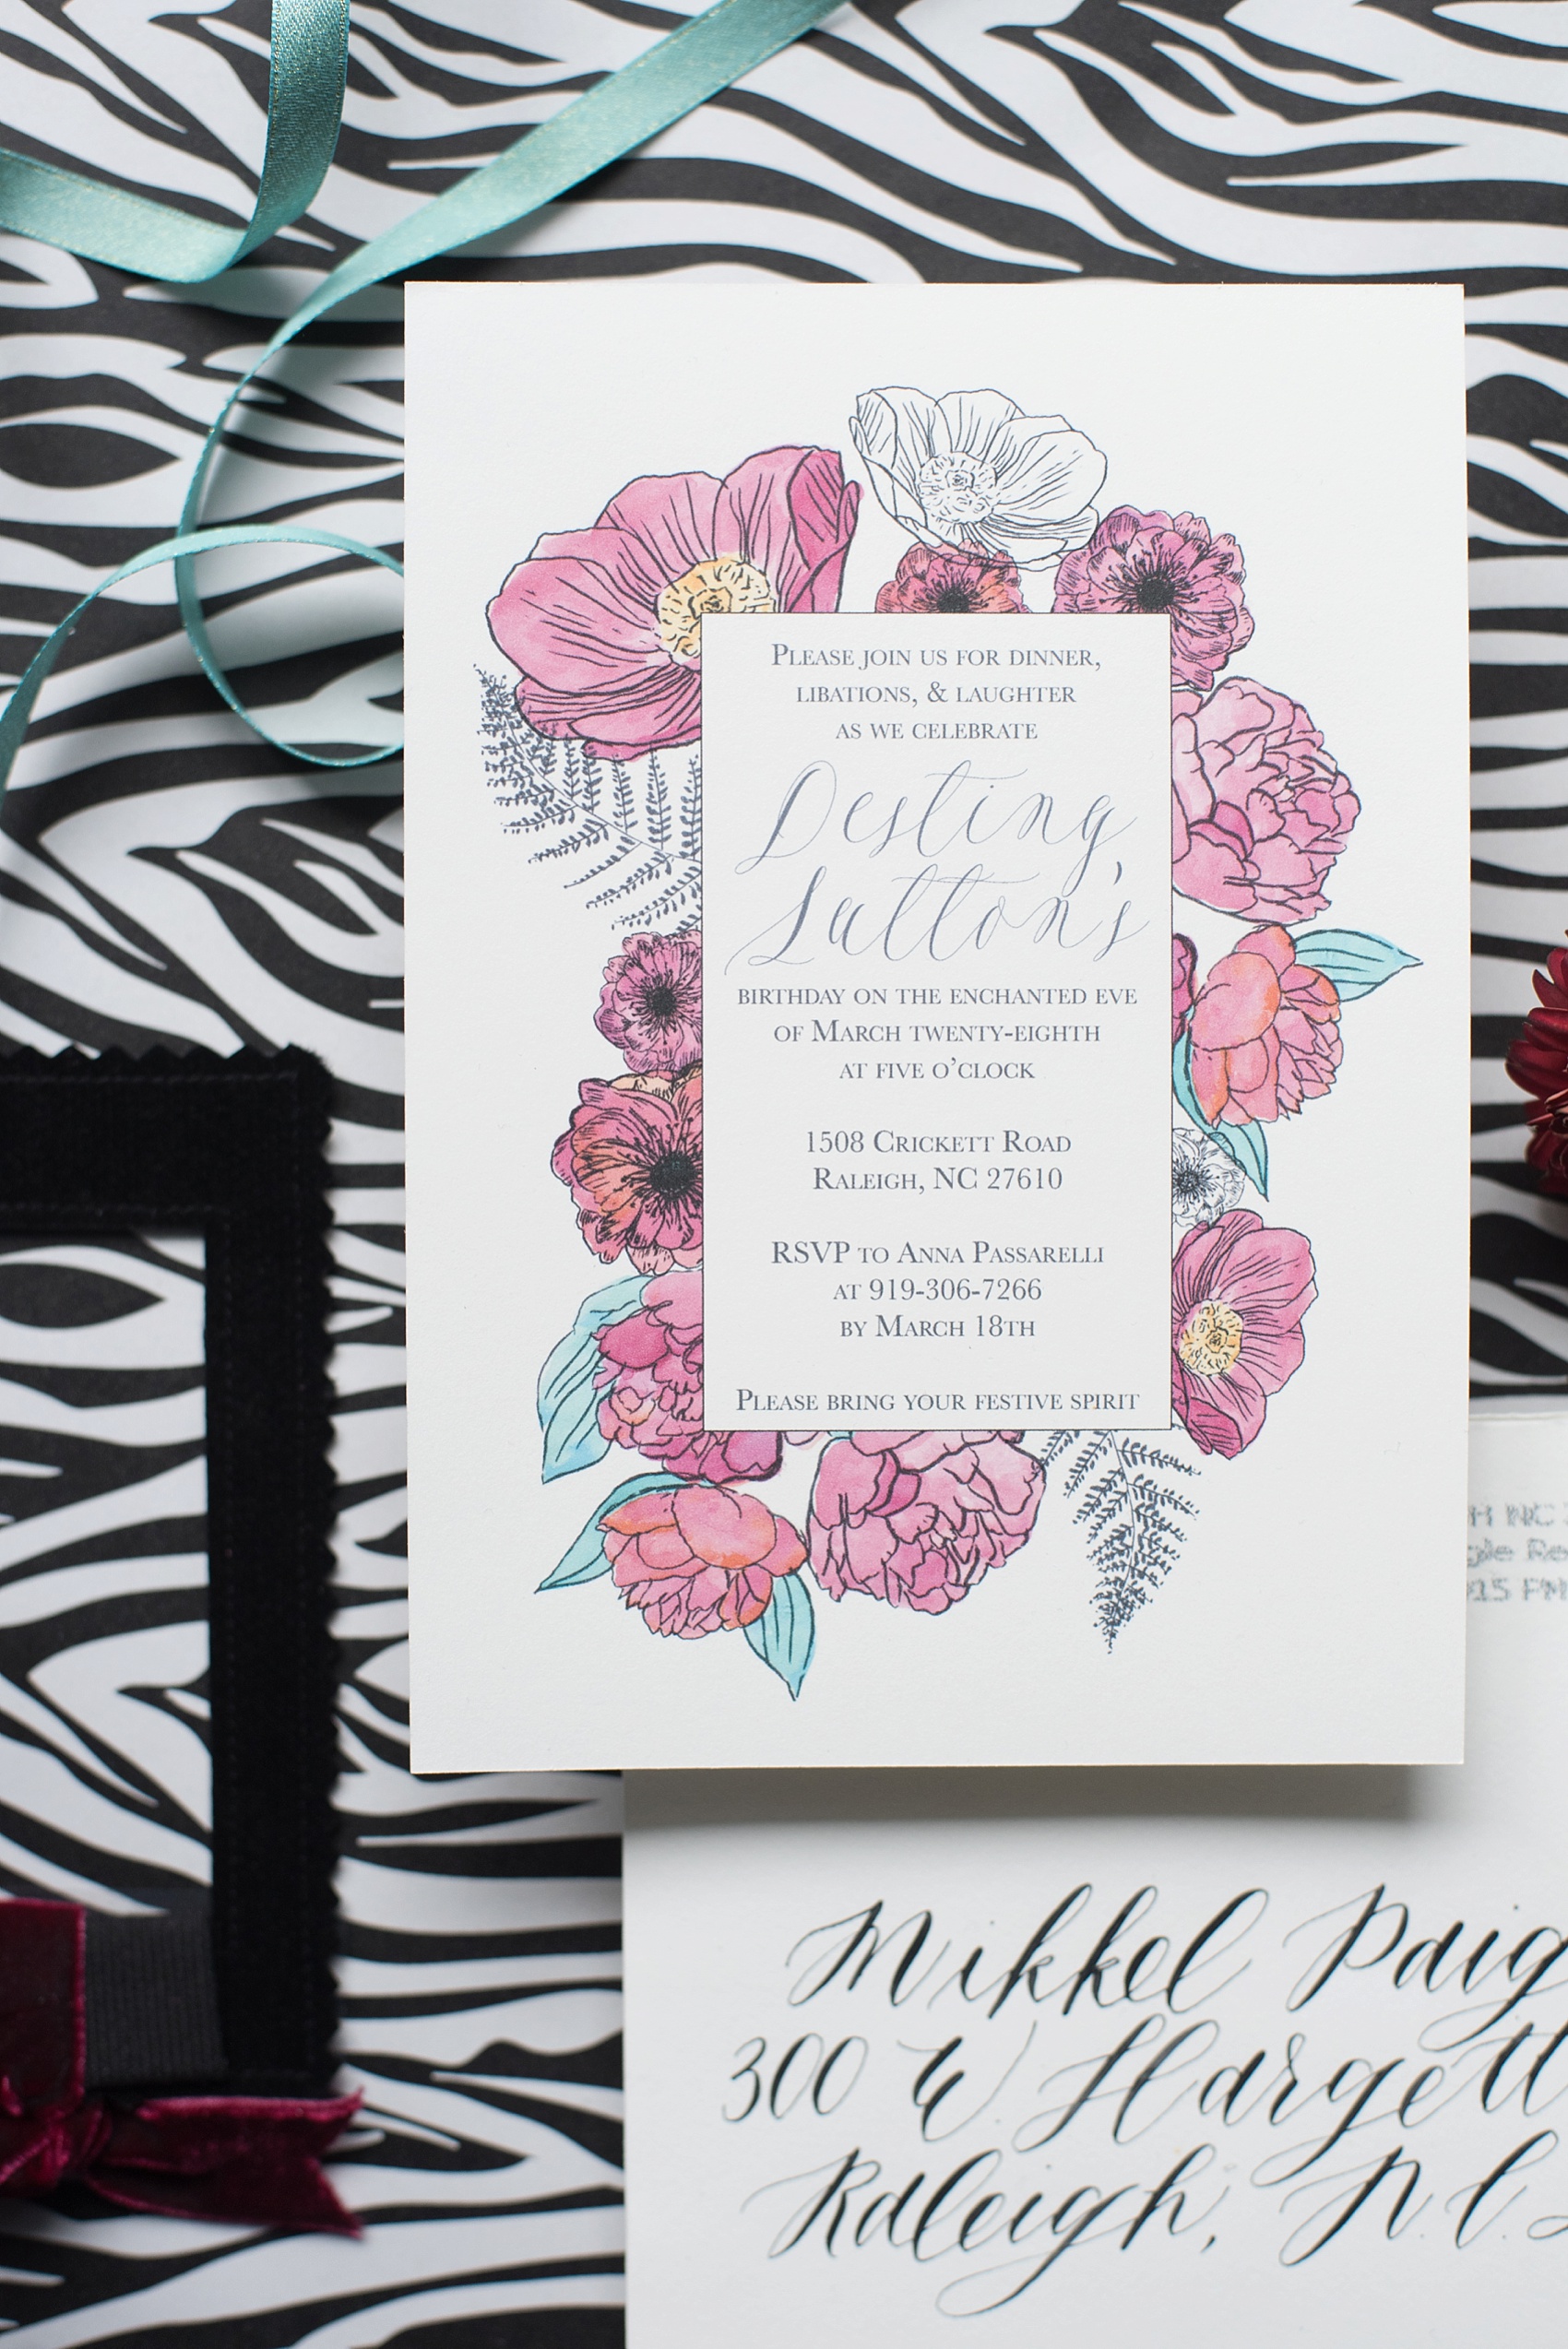 Custom floral birthday invitation. Photo by Raleigh wedding photographer Mikkel Paige, calligraphy and design by One and Only. 